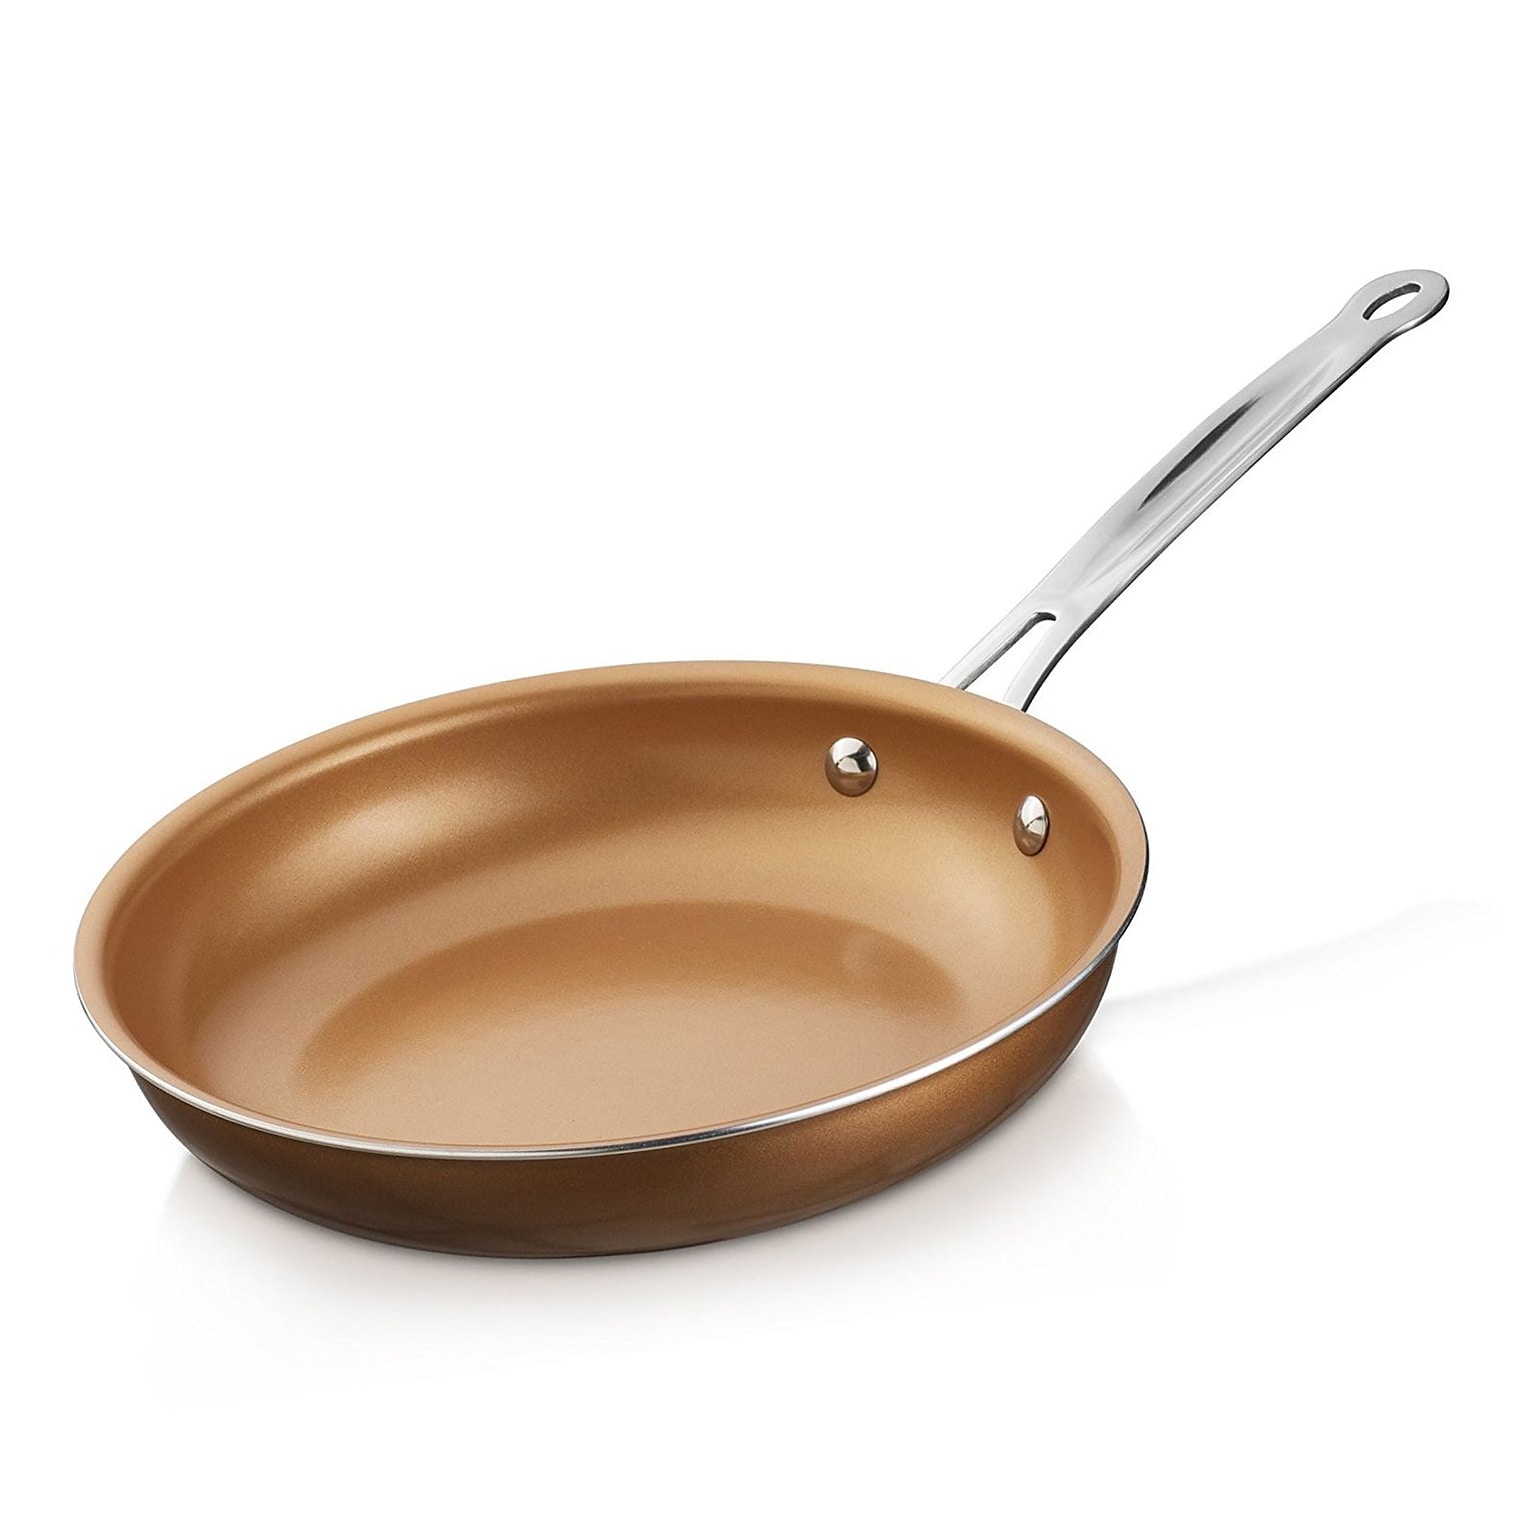 Brentwood 9.5 Induction Copper and Non-Stick Ceramic Coating Frying Pan (93599881M)